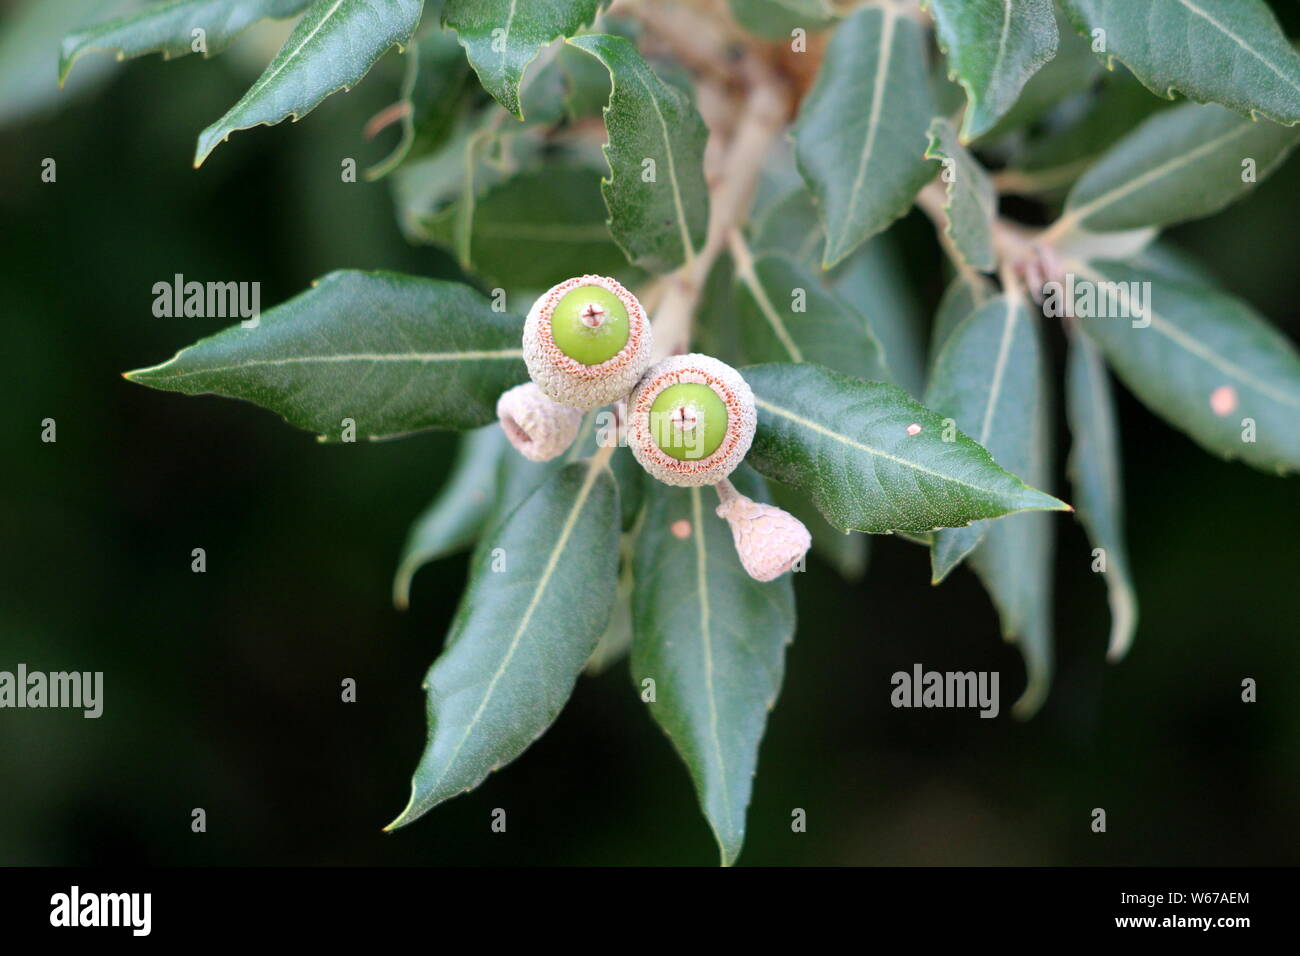 Branch of Evergreen oak or Quercus ilex or Holly oak or Holm oak evergreen oak tree with young light green shoots clothed with a close grey felt Stock Photo